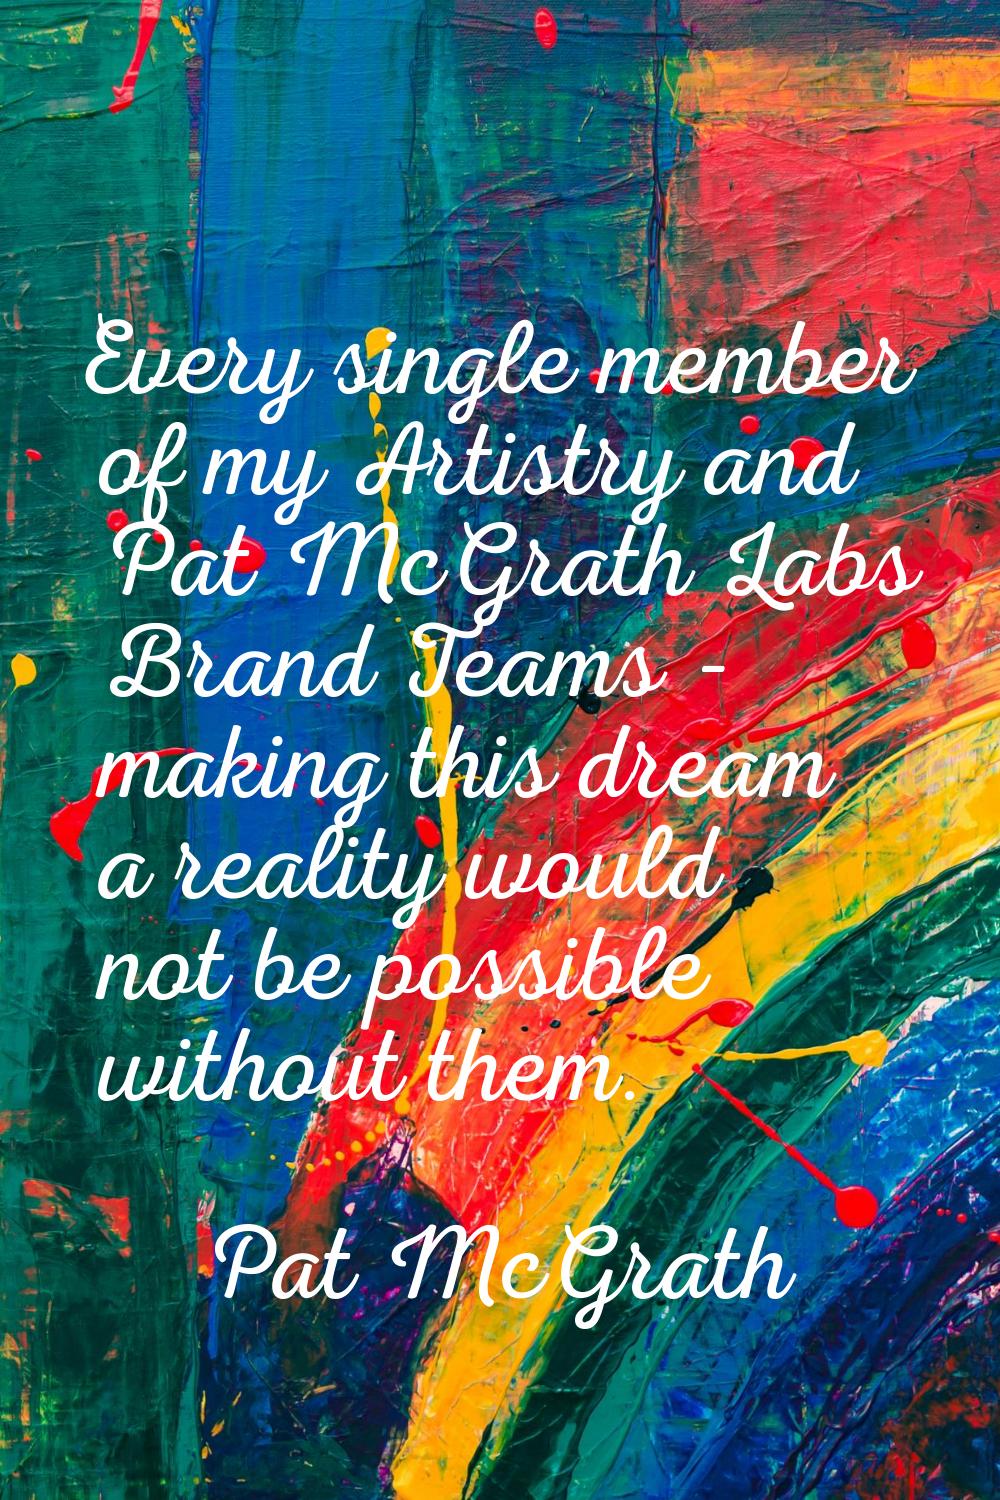 Every single member of my Artistry and Pat McGrath Labs Brand Teams - making this dream a reality w